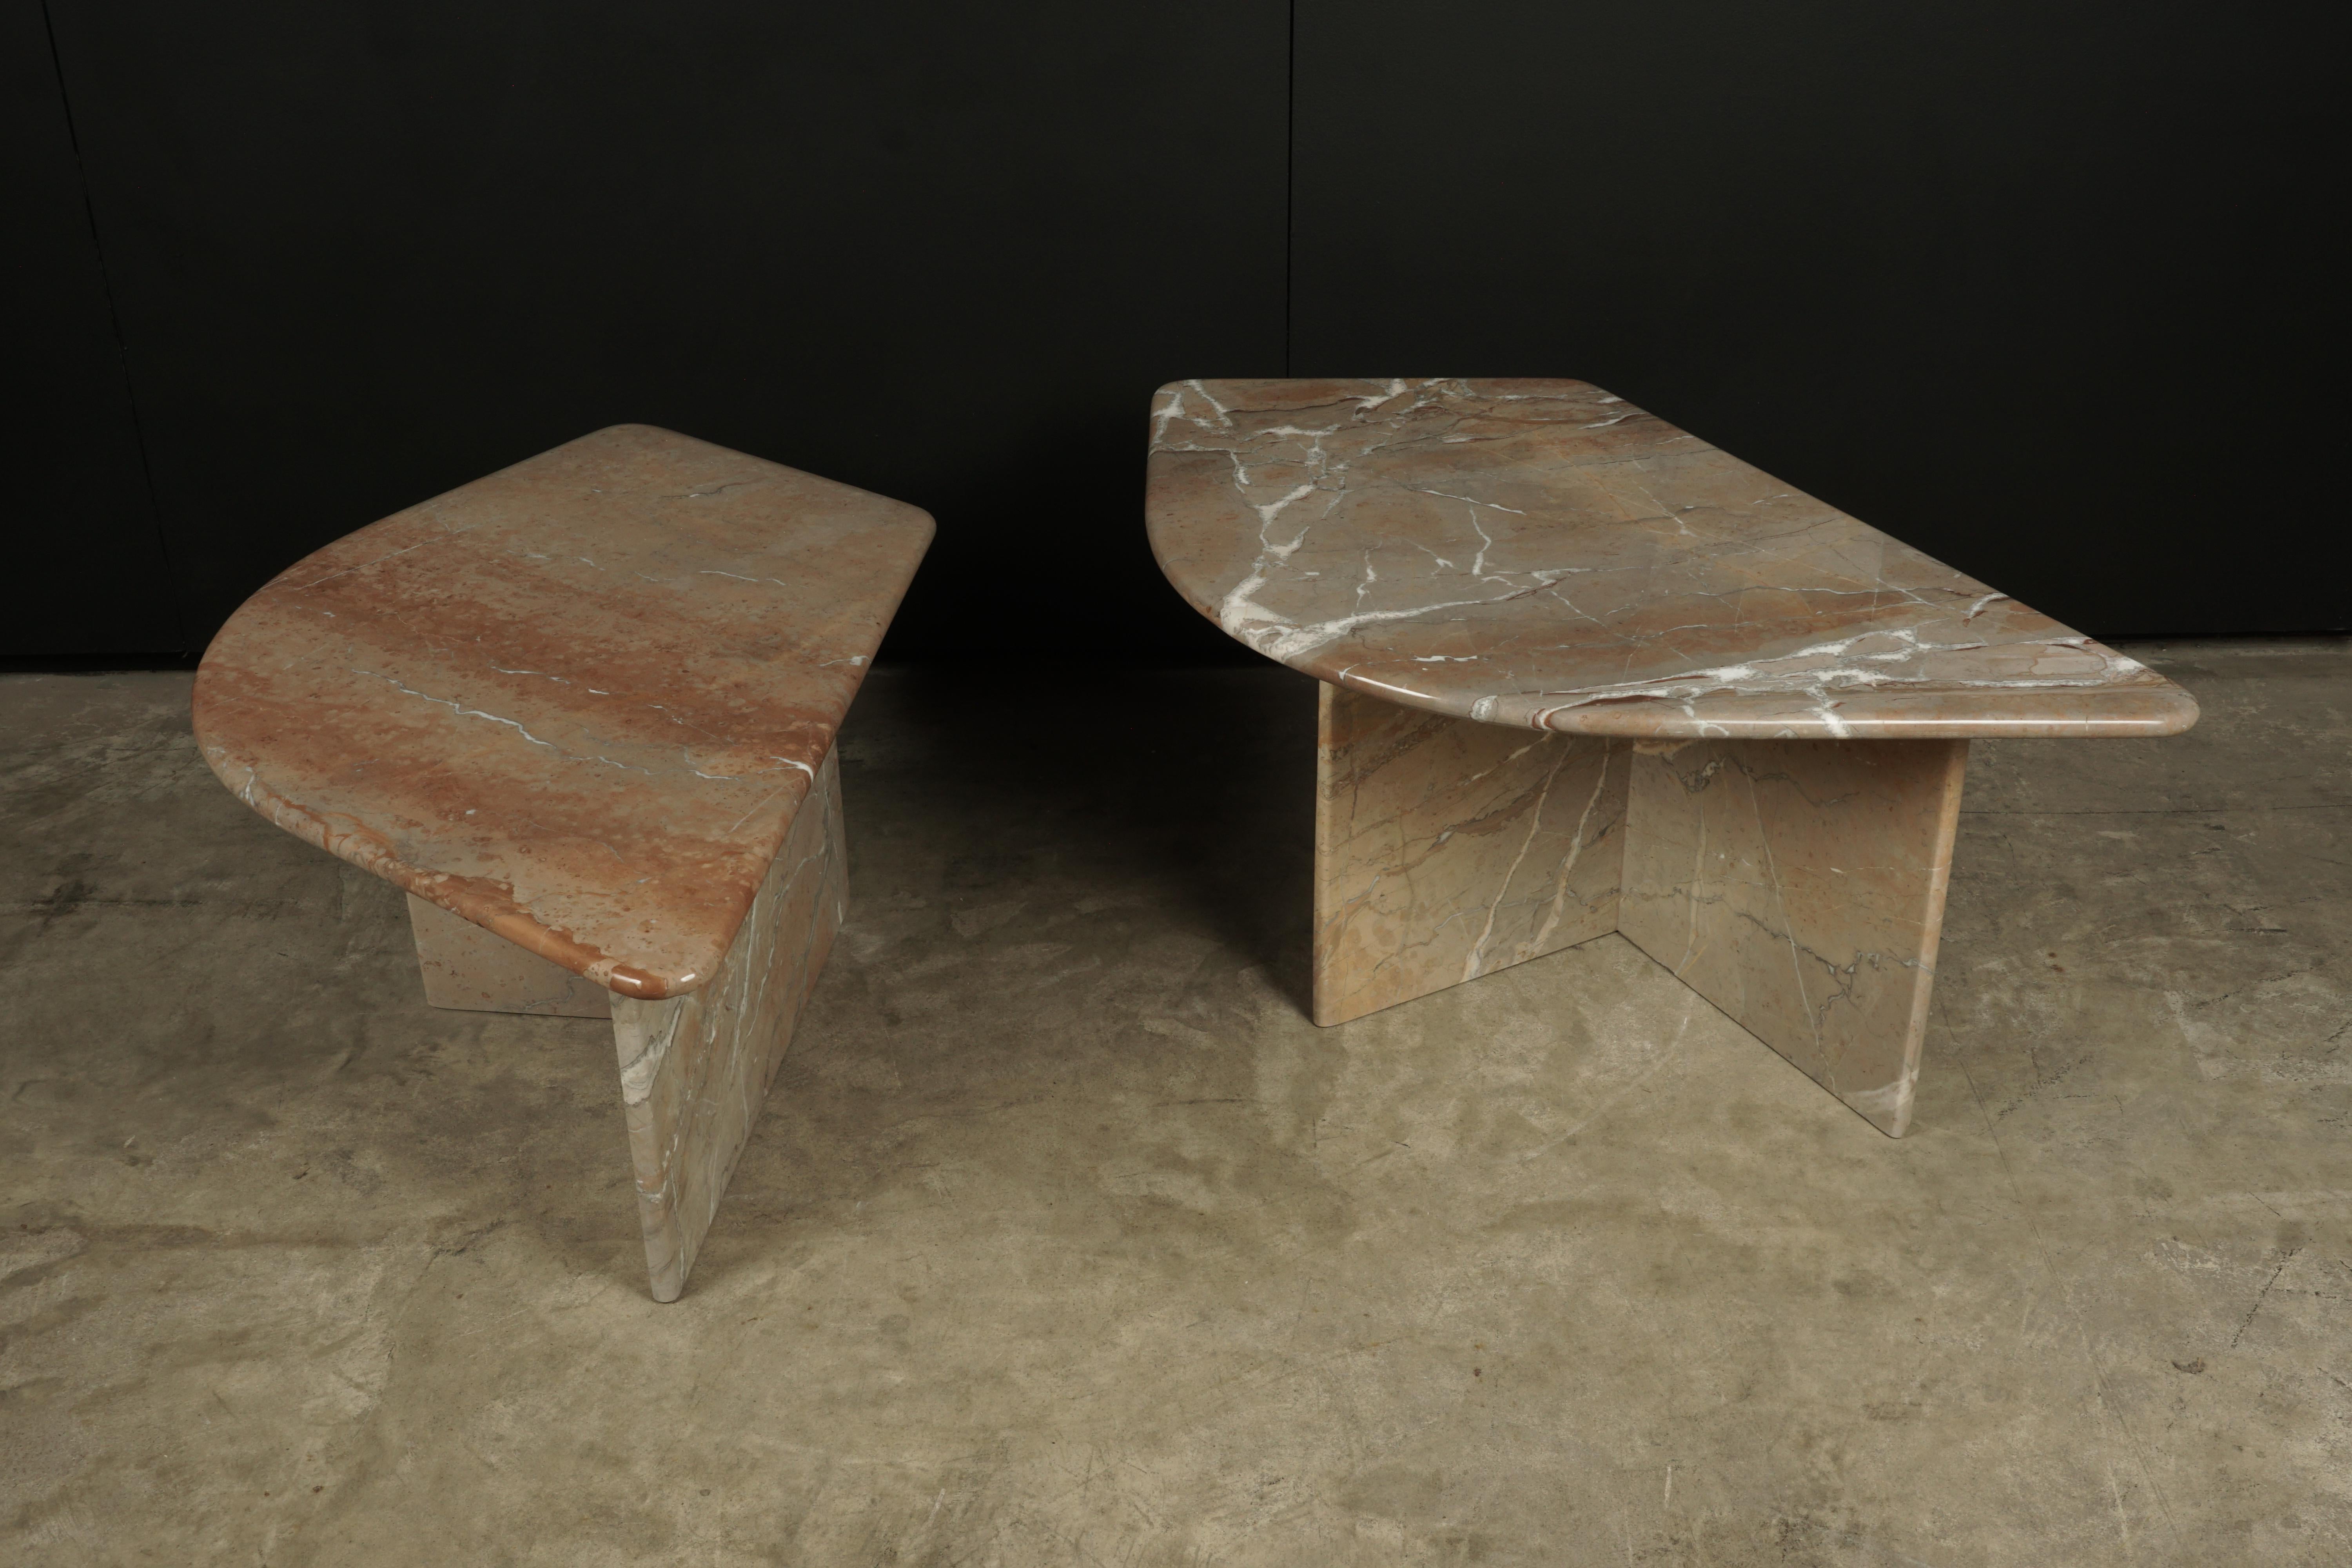 European Midcentury Marble Coffee Tables from France, circa 1970